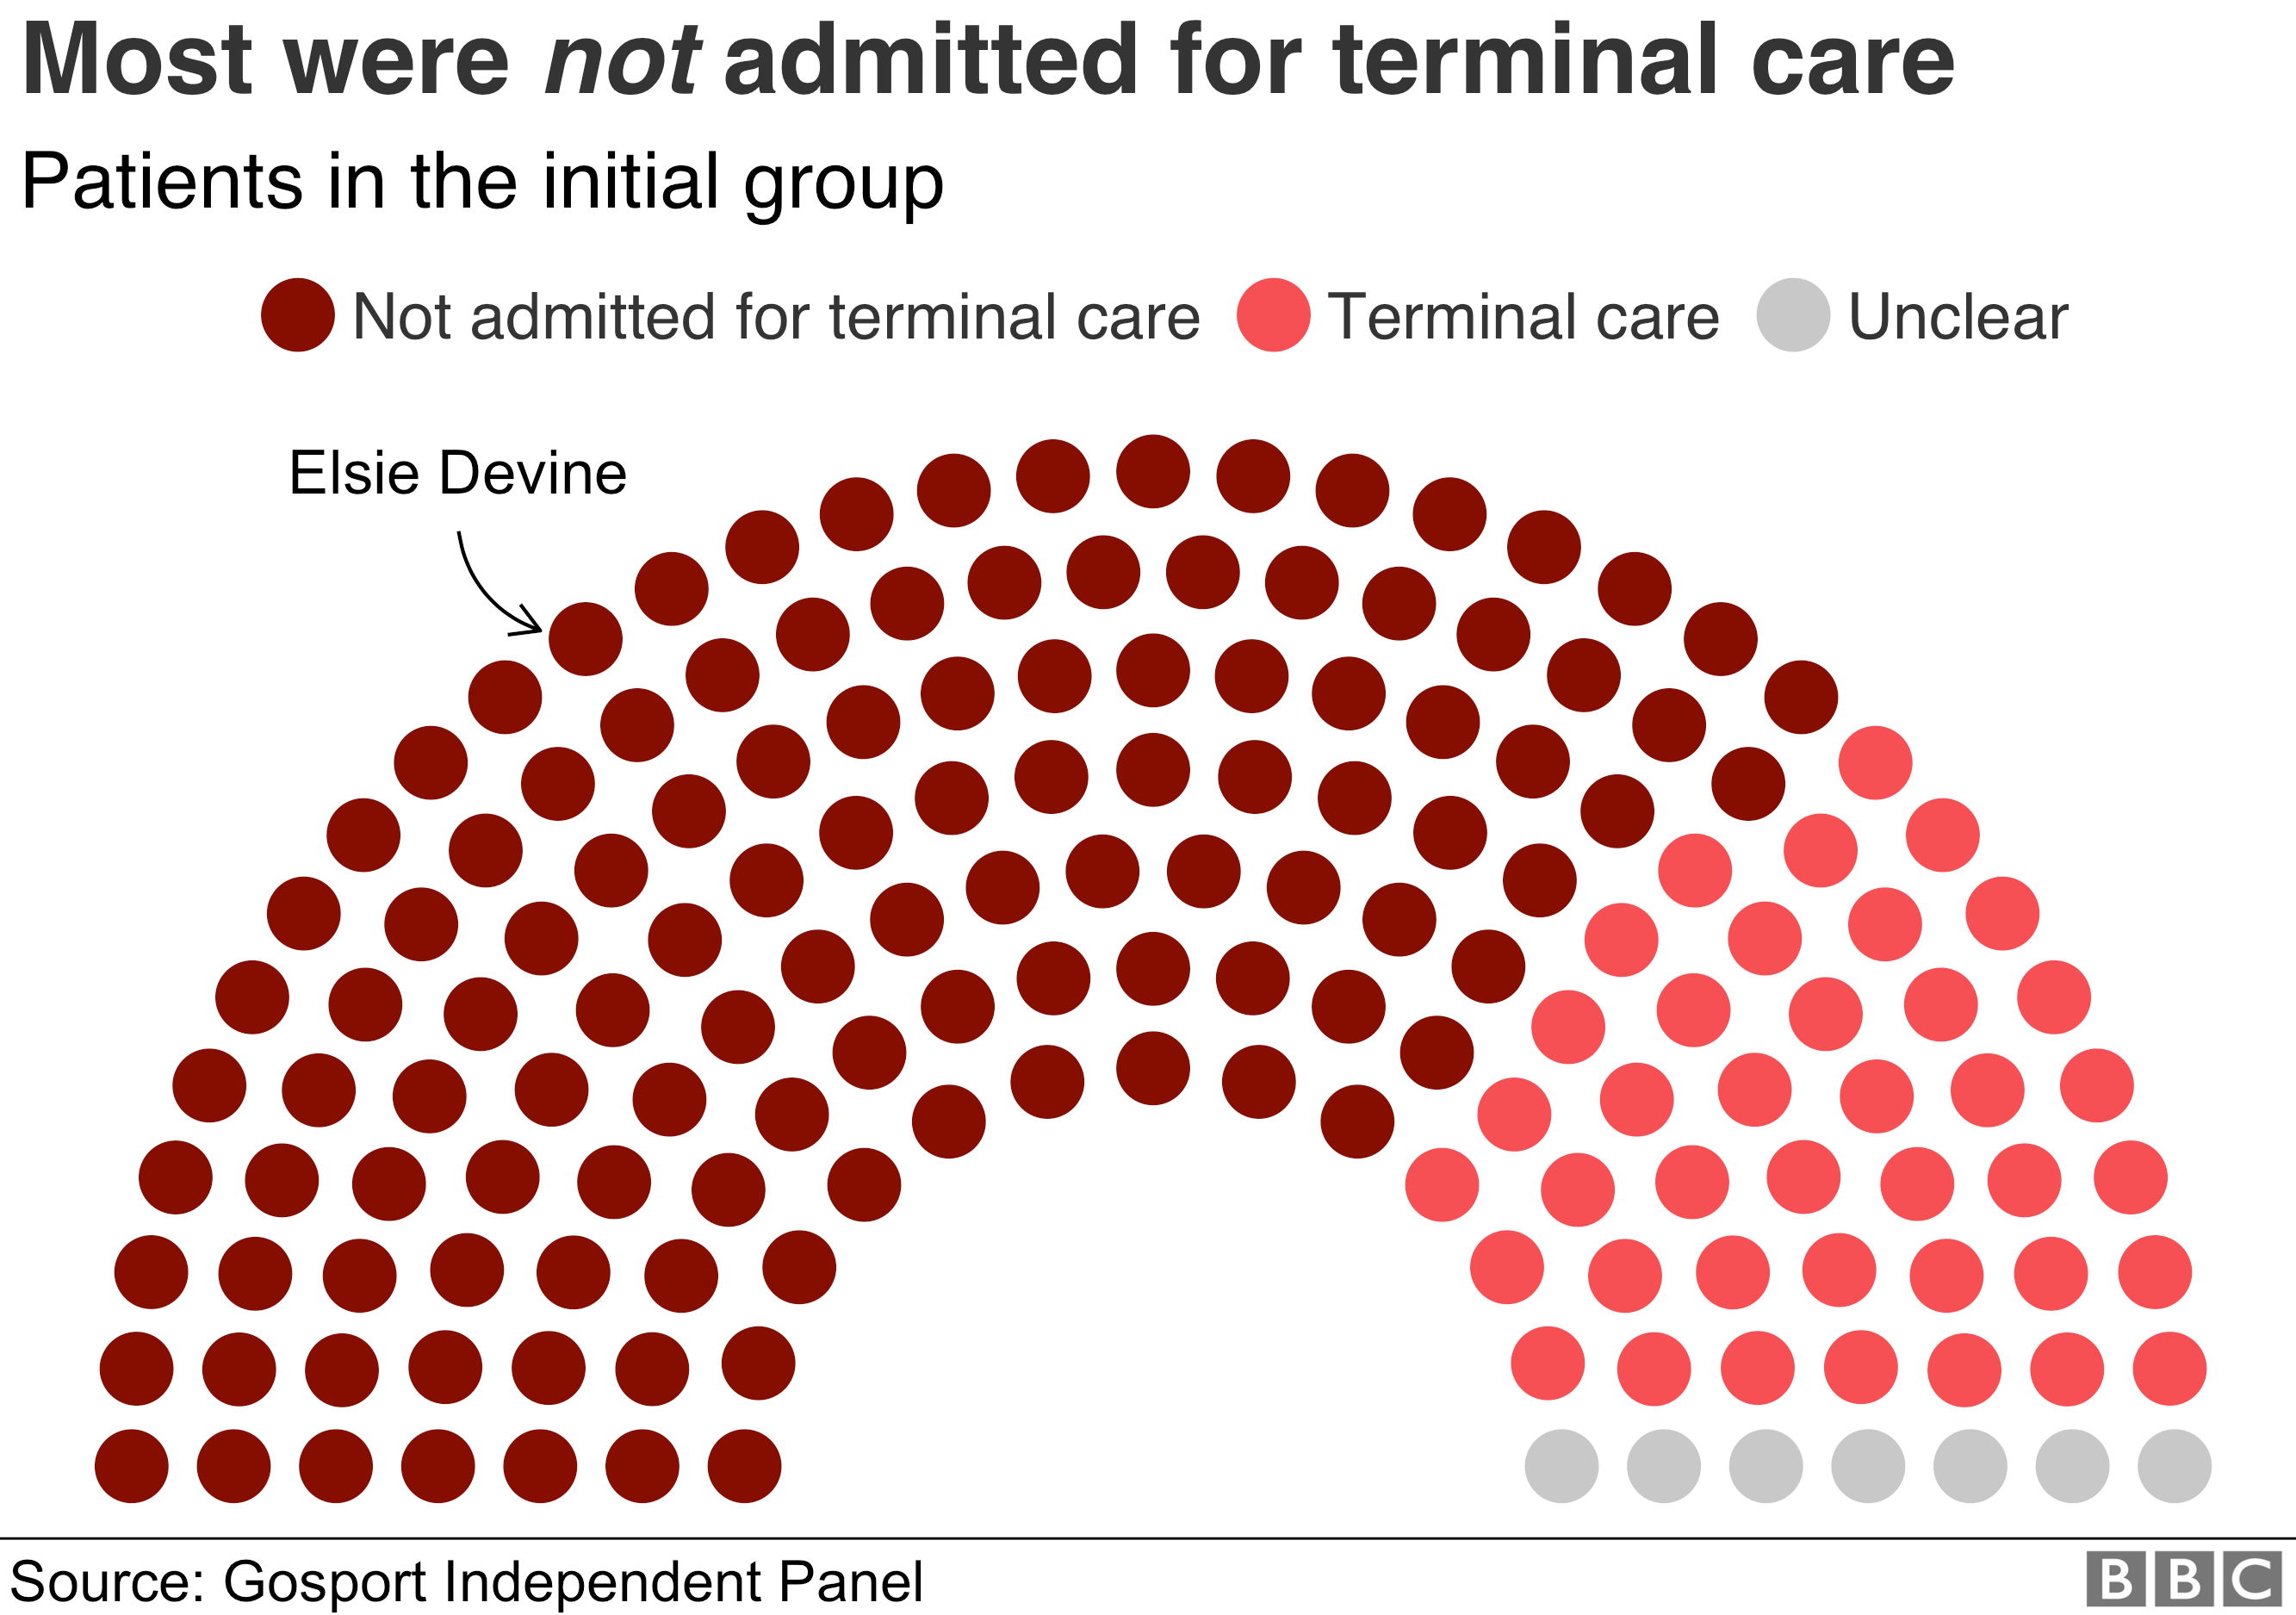 Chart showing patients admitted for terminal care